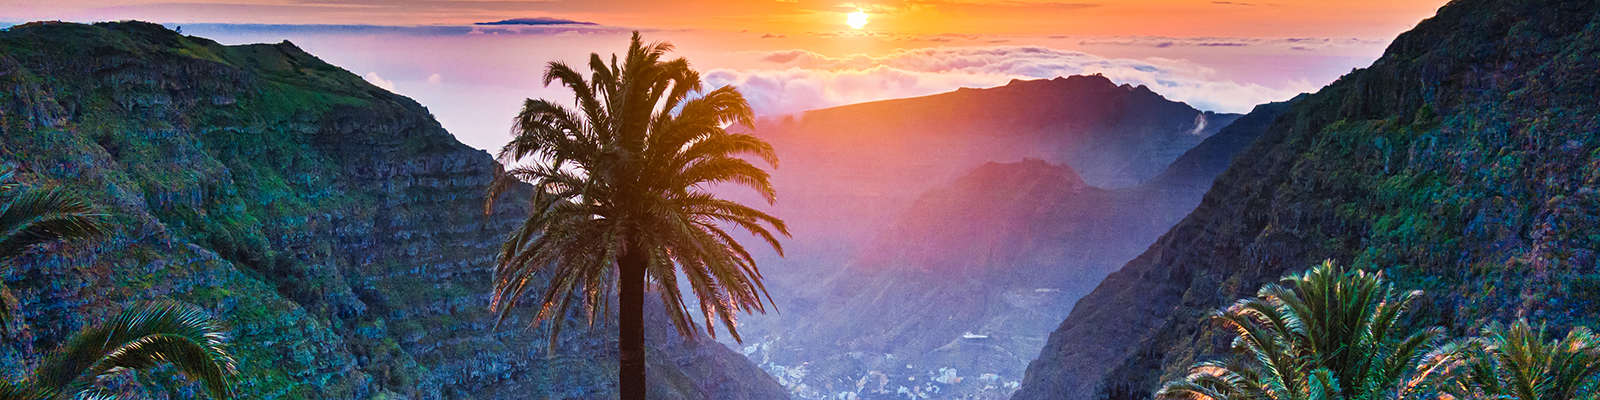 El Hierro, paradise in the Canary Islands